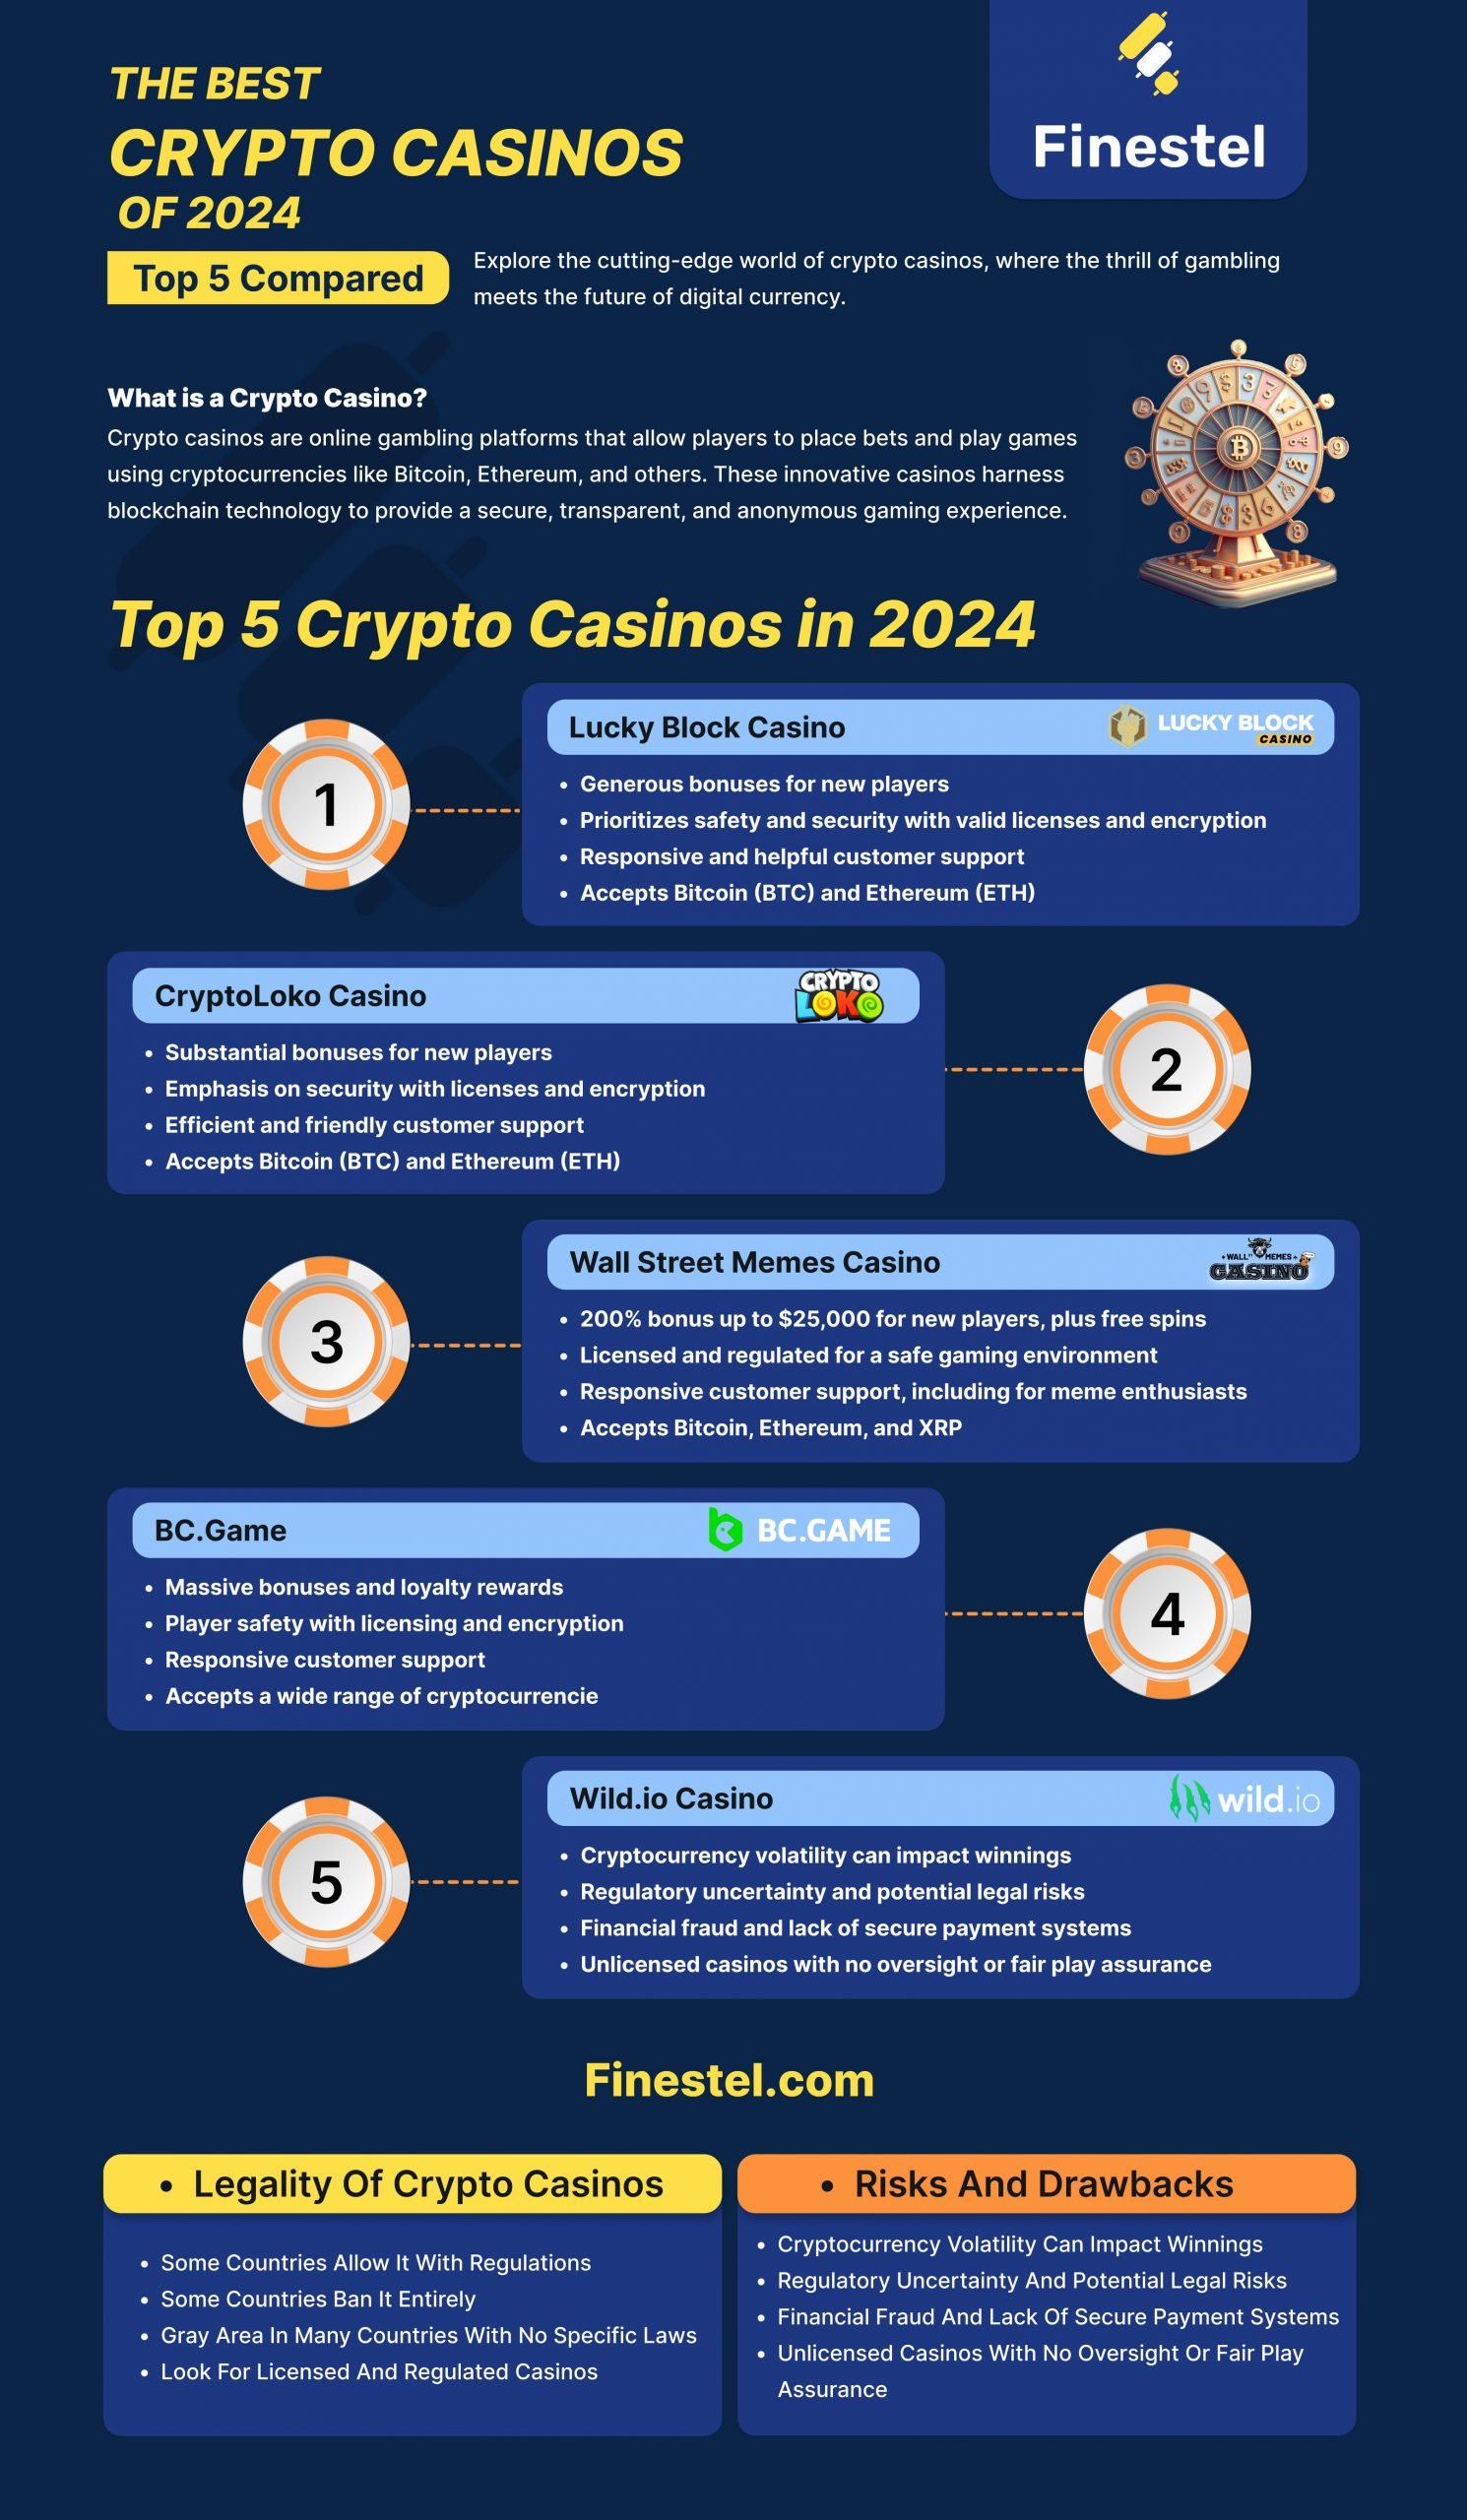 Top 15 Crypto Casinos in 2024 Infographic